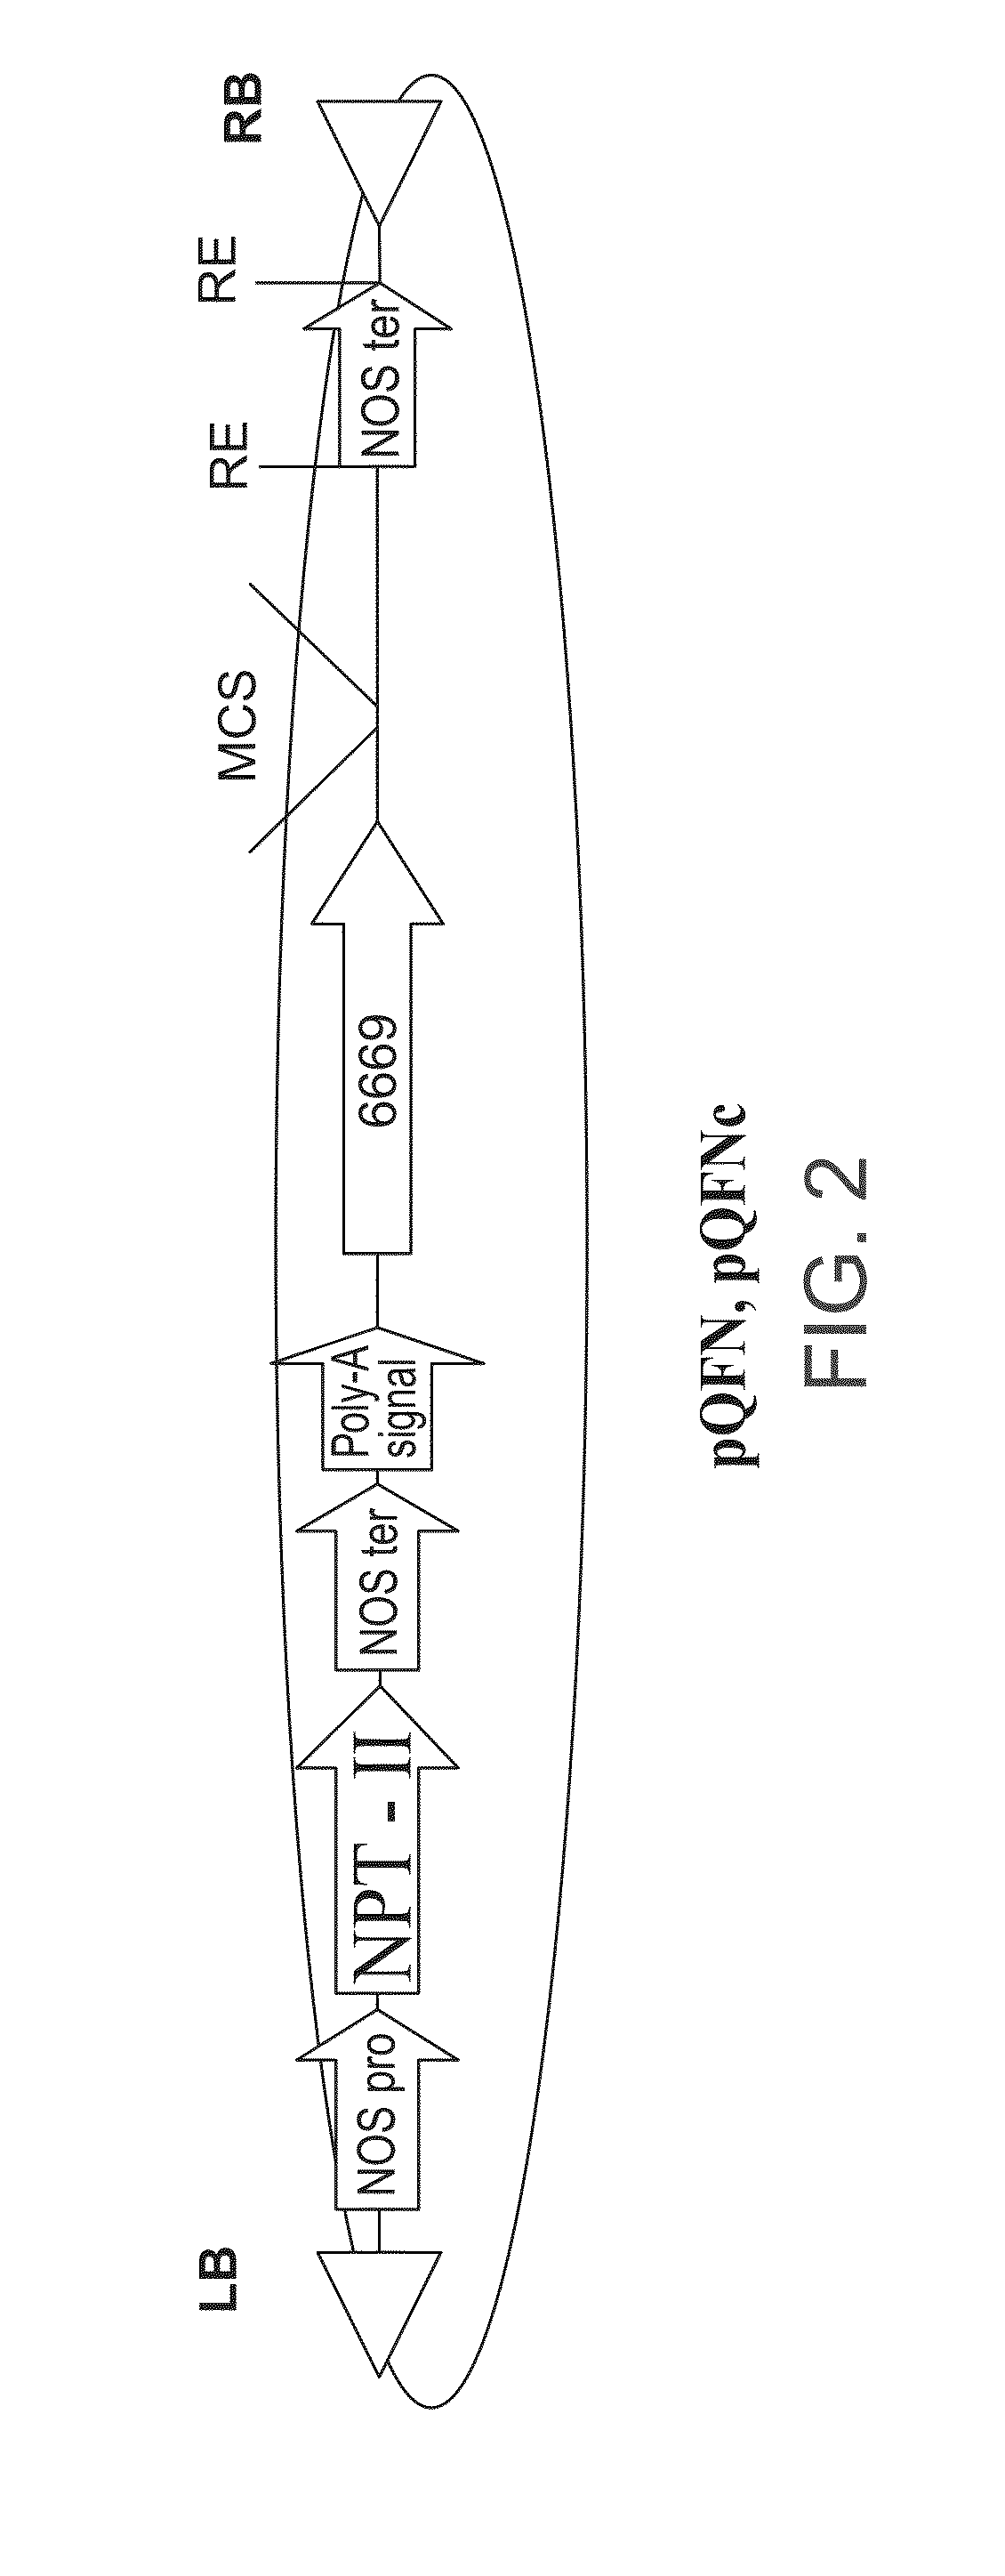 Isolated polynucleotides and polypeptides, and methods of using same for increasing plant yield and/or agricultural characteristics